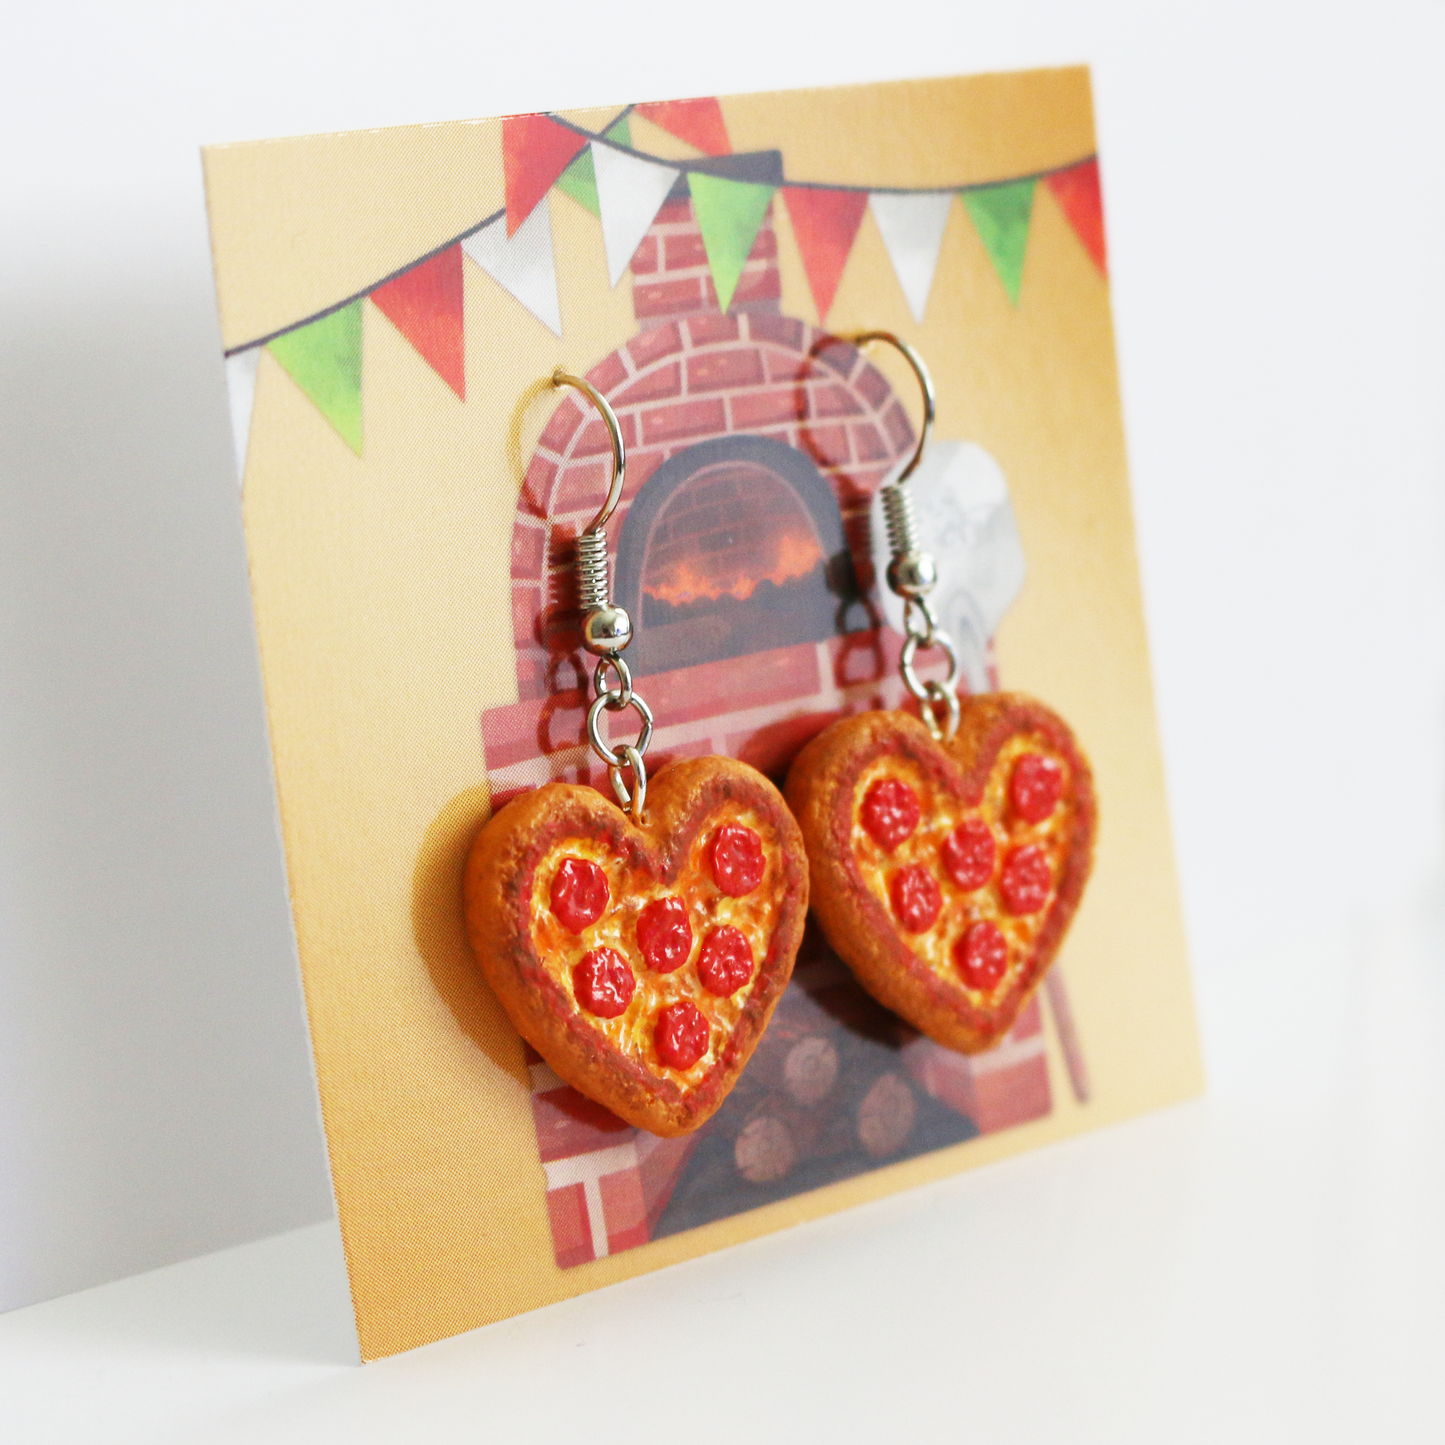 Pepperoni Pizza Earrings | Miniature Realistic Looking | Food Jewelry | Heart Shaped | S'Berry Boutique